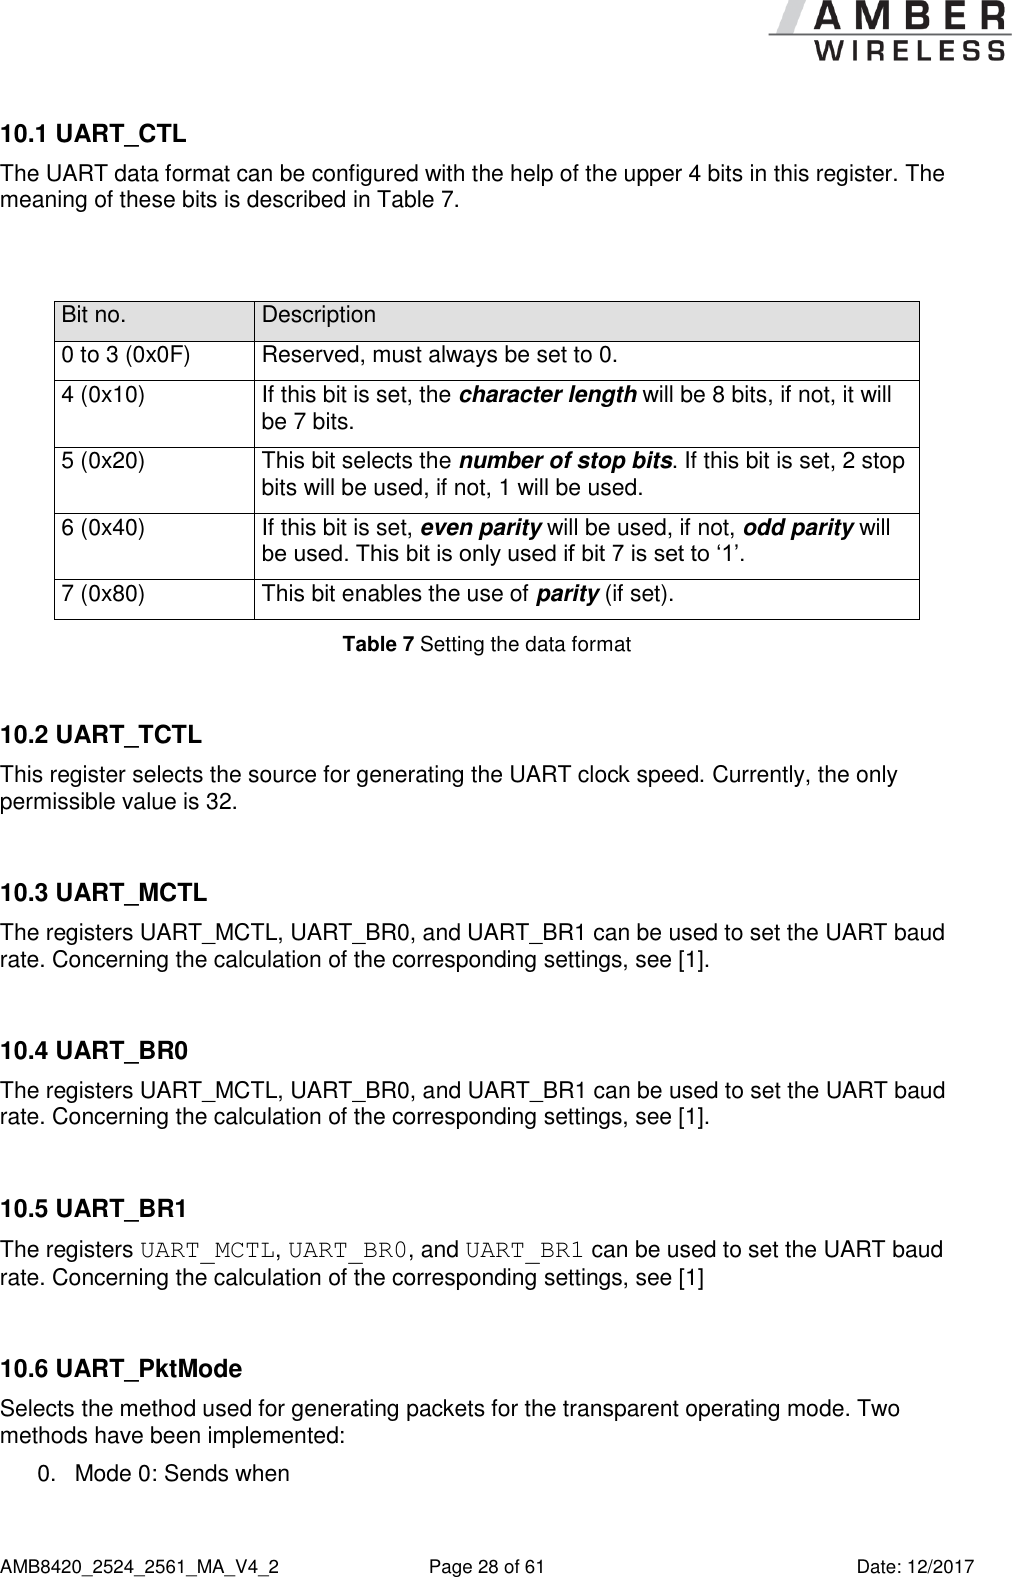      AMB8420_2524_2561_MA_V4_2  Page 28 of 61  Date: 12/2017 10.1 UART_CTL The UART data format can be configured with the help of the upper 4 bits in this register. The meaning of these bits is described in Table 7.   Bit no. Description 0 to 3 (0x0F) Reserved, must always be set to 0. 4 (0x10) If this bit is set, the character length will be 8 bits, if not, it will be 7 bits. 5 (0x20) This bit selects the number of stop bits. If this bit is set, 2 stop bits will be used, if not, 1 will be used. 6 (0x40) If this bit is set, even parity will be used, if not, odd parity will be used. This bit is only used if bit 7 is set to ‘1’. 7 (0x80) This bit enables the use of parity (if set). Table 7 Setting the data format   10.2 UART_TCTL This register selects the source for generating the UART clock speed. Currently, the only permissible value is 32.  10.3 UART_MCTL The registers UART_MCTL, UART_BR0, and UART_BR1 can be used to set the UART baud rate. Concerning the calculation of the corresponding settings, see [1].  10.4 UART_BR0 The registers UART_MCTL, UART_BR0, and UART_BR1 can be used to set the UART baud rate. Concerning the calculation of the corresponding settings, see [1].  10.5 UART_BR1 The registers UART_MCTL, UART_BR0, and UART_BR1 can be used to set the UART baud rate. Concerning the calculation of the corresponding settings, see [1]  10.6 UART_PktMode Selects the method used for generating packets for the transparent operating mode. Two methods have been implemented:  0.  Mode 0: Sends when 